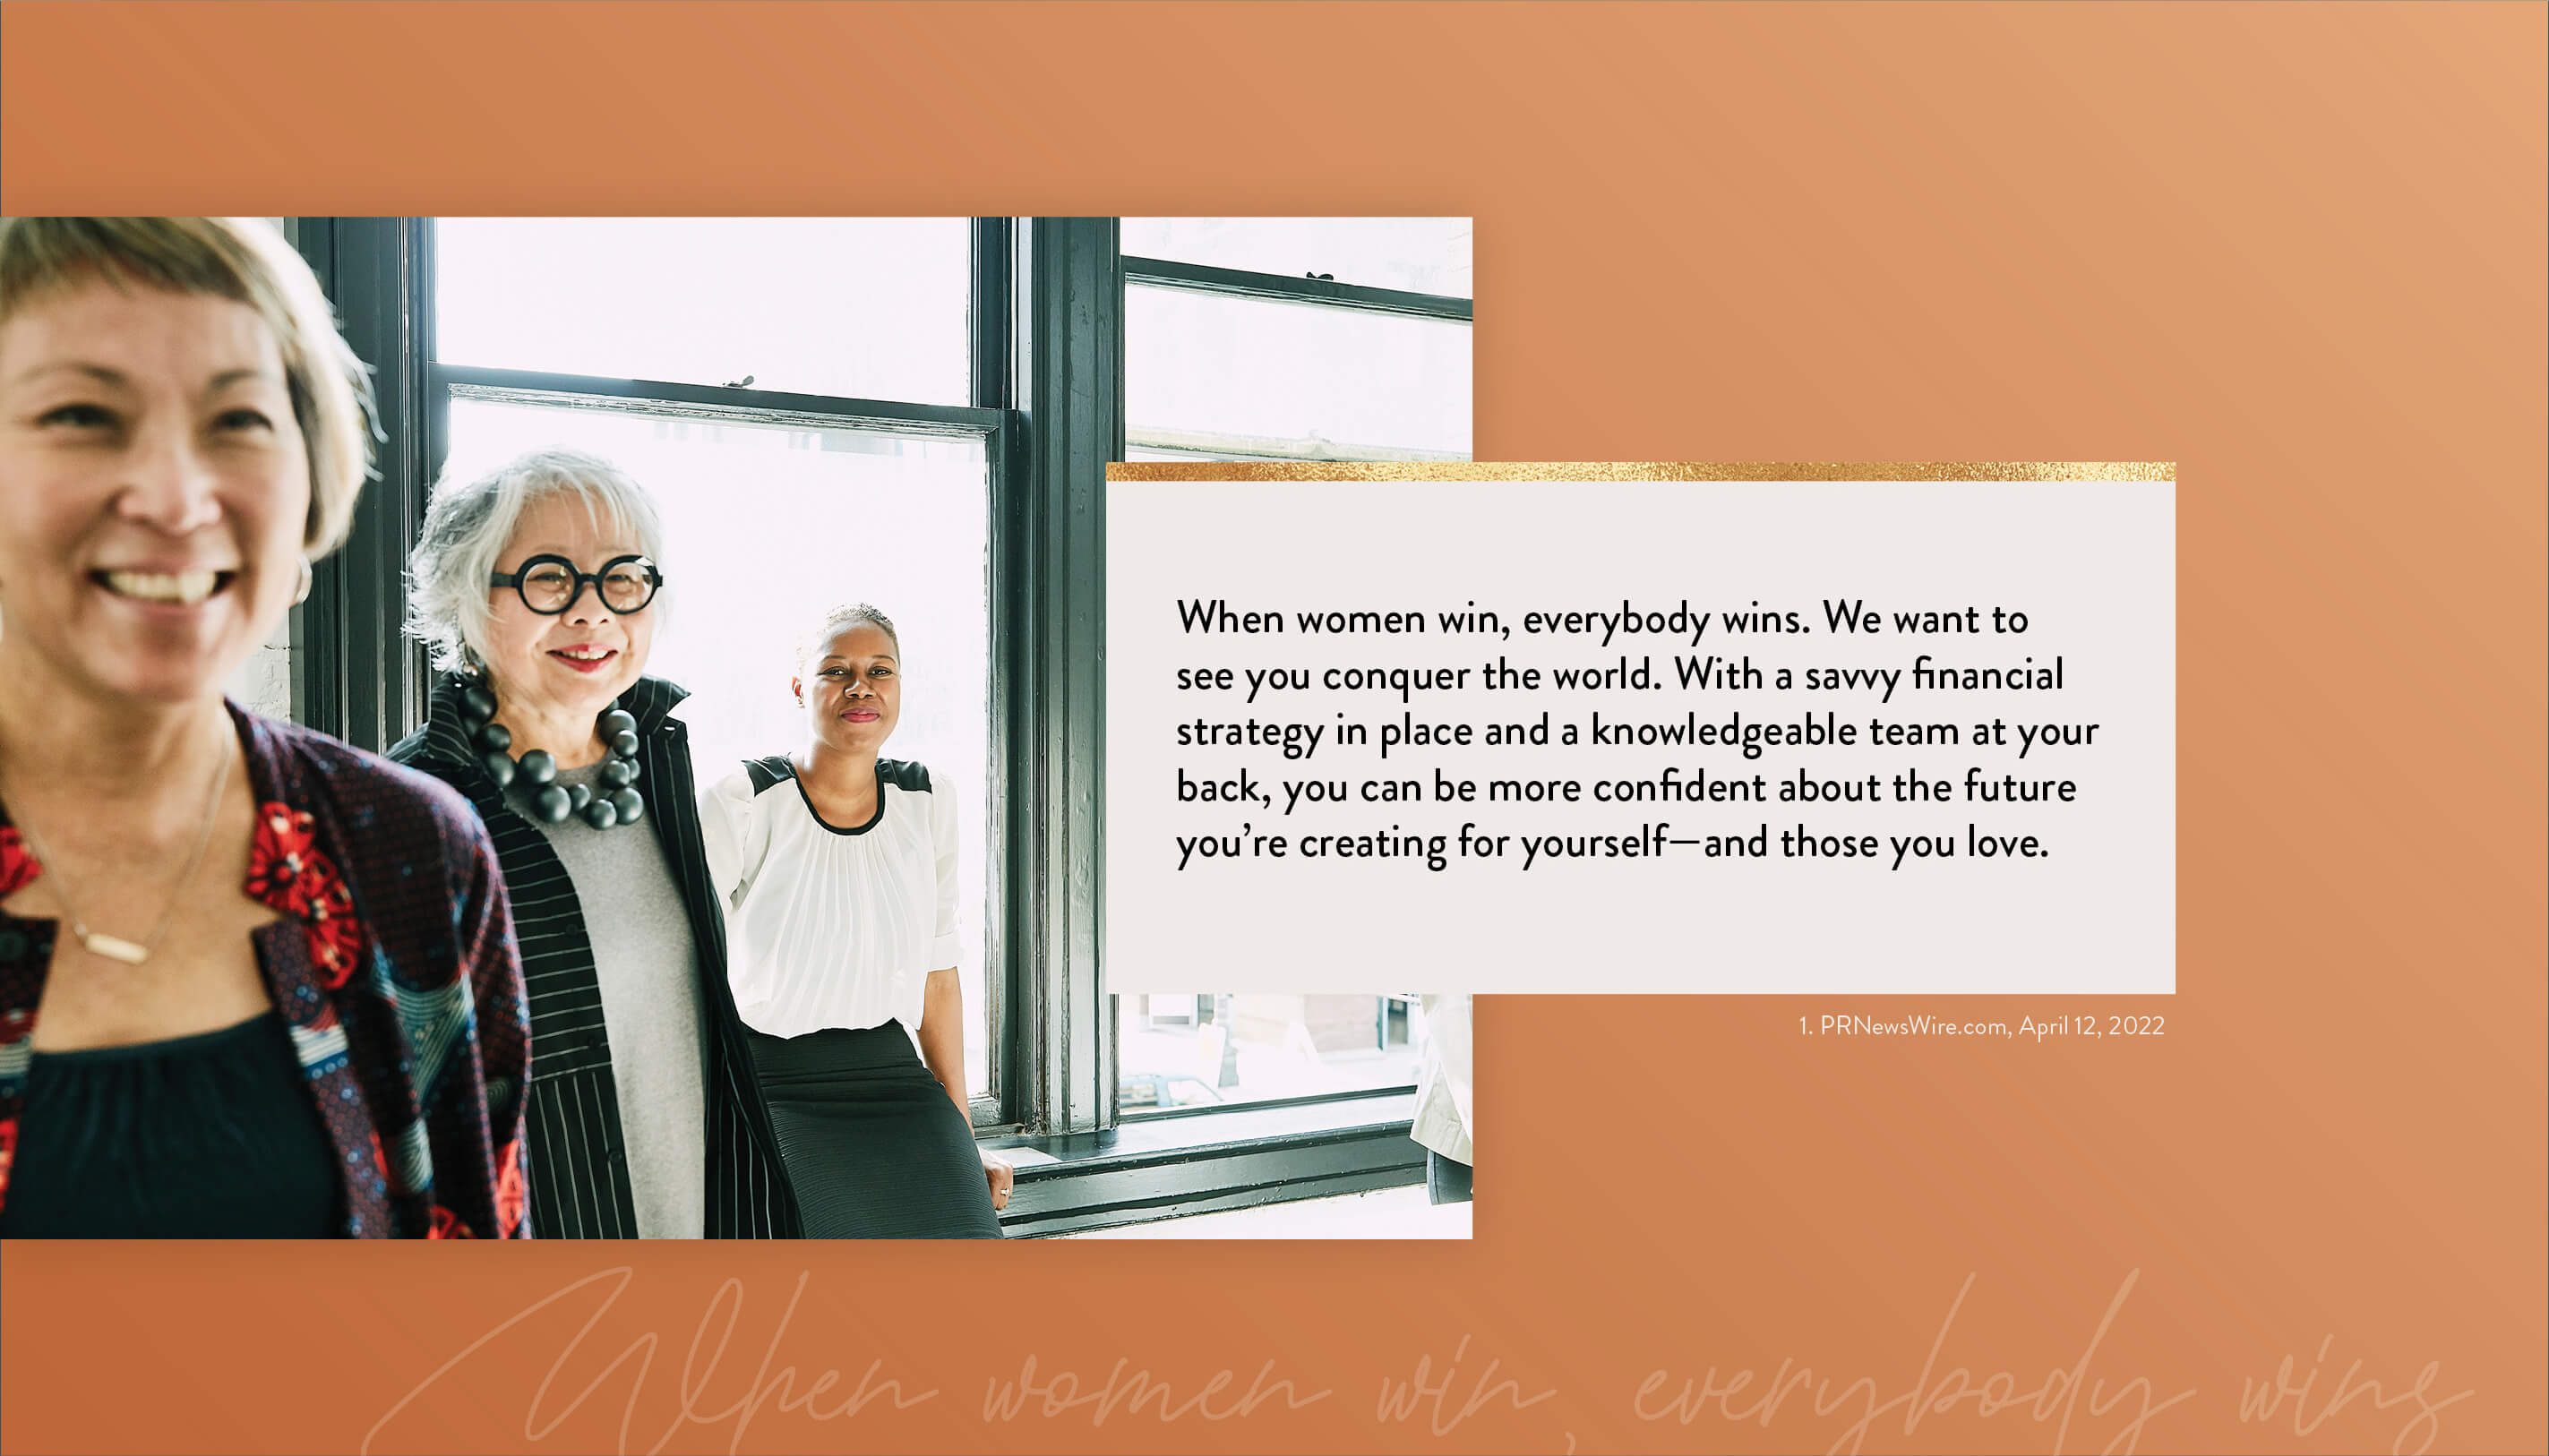 When women win, everybody wins. We want to see you conquer the world. With a savvy financial strategy in place and a knowledgeable team at your back, you can be more confident about the future you’re creating for yourself–and those you love. 1. PRNewsWire.com, April 12, 2022 https://www.kiplinger.com/personal-finance/601731/flying-solo-5-financial-strategies-every-single-woman-should-know